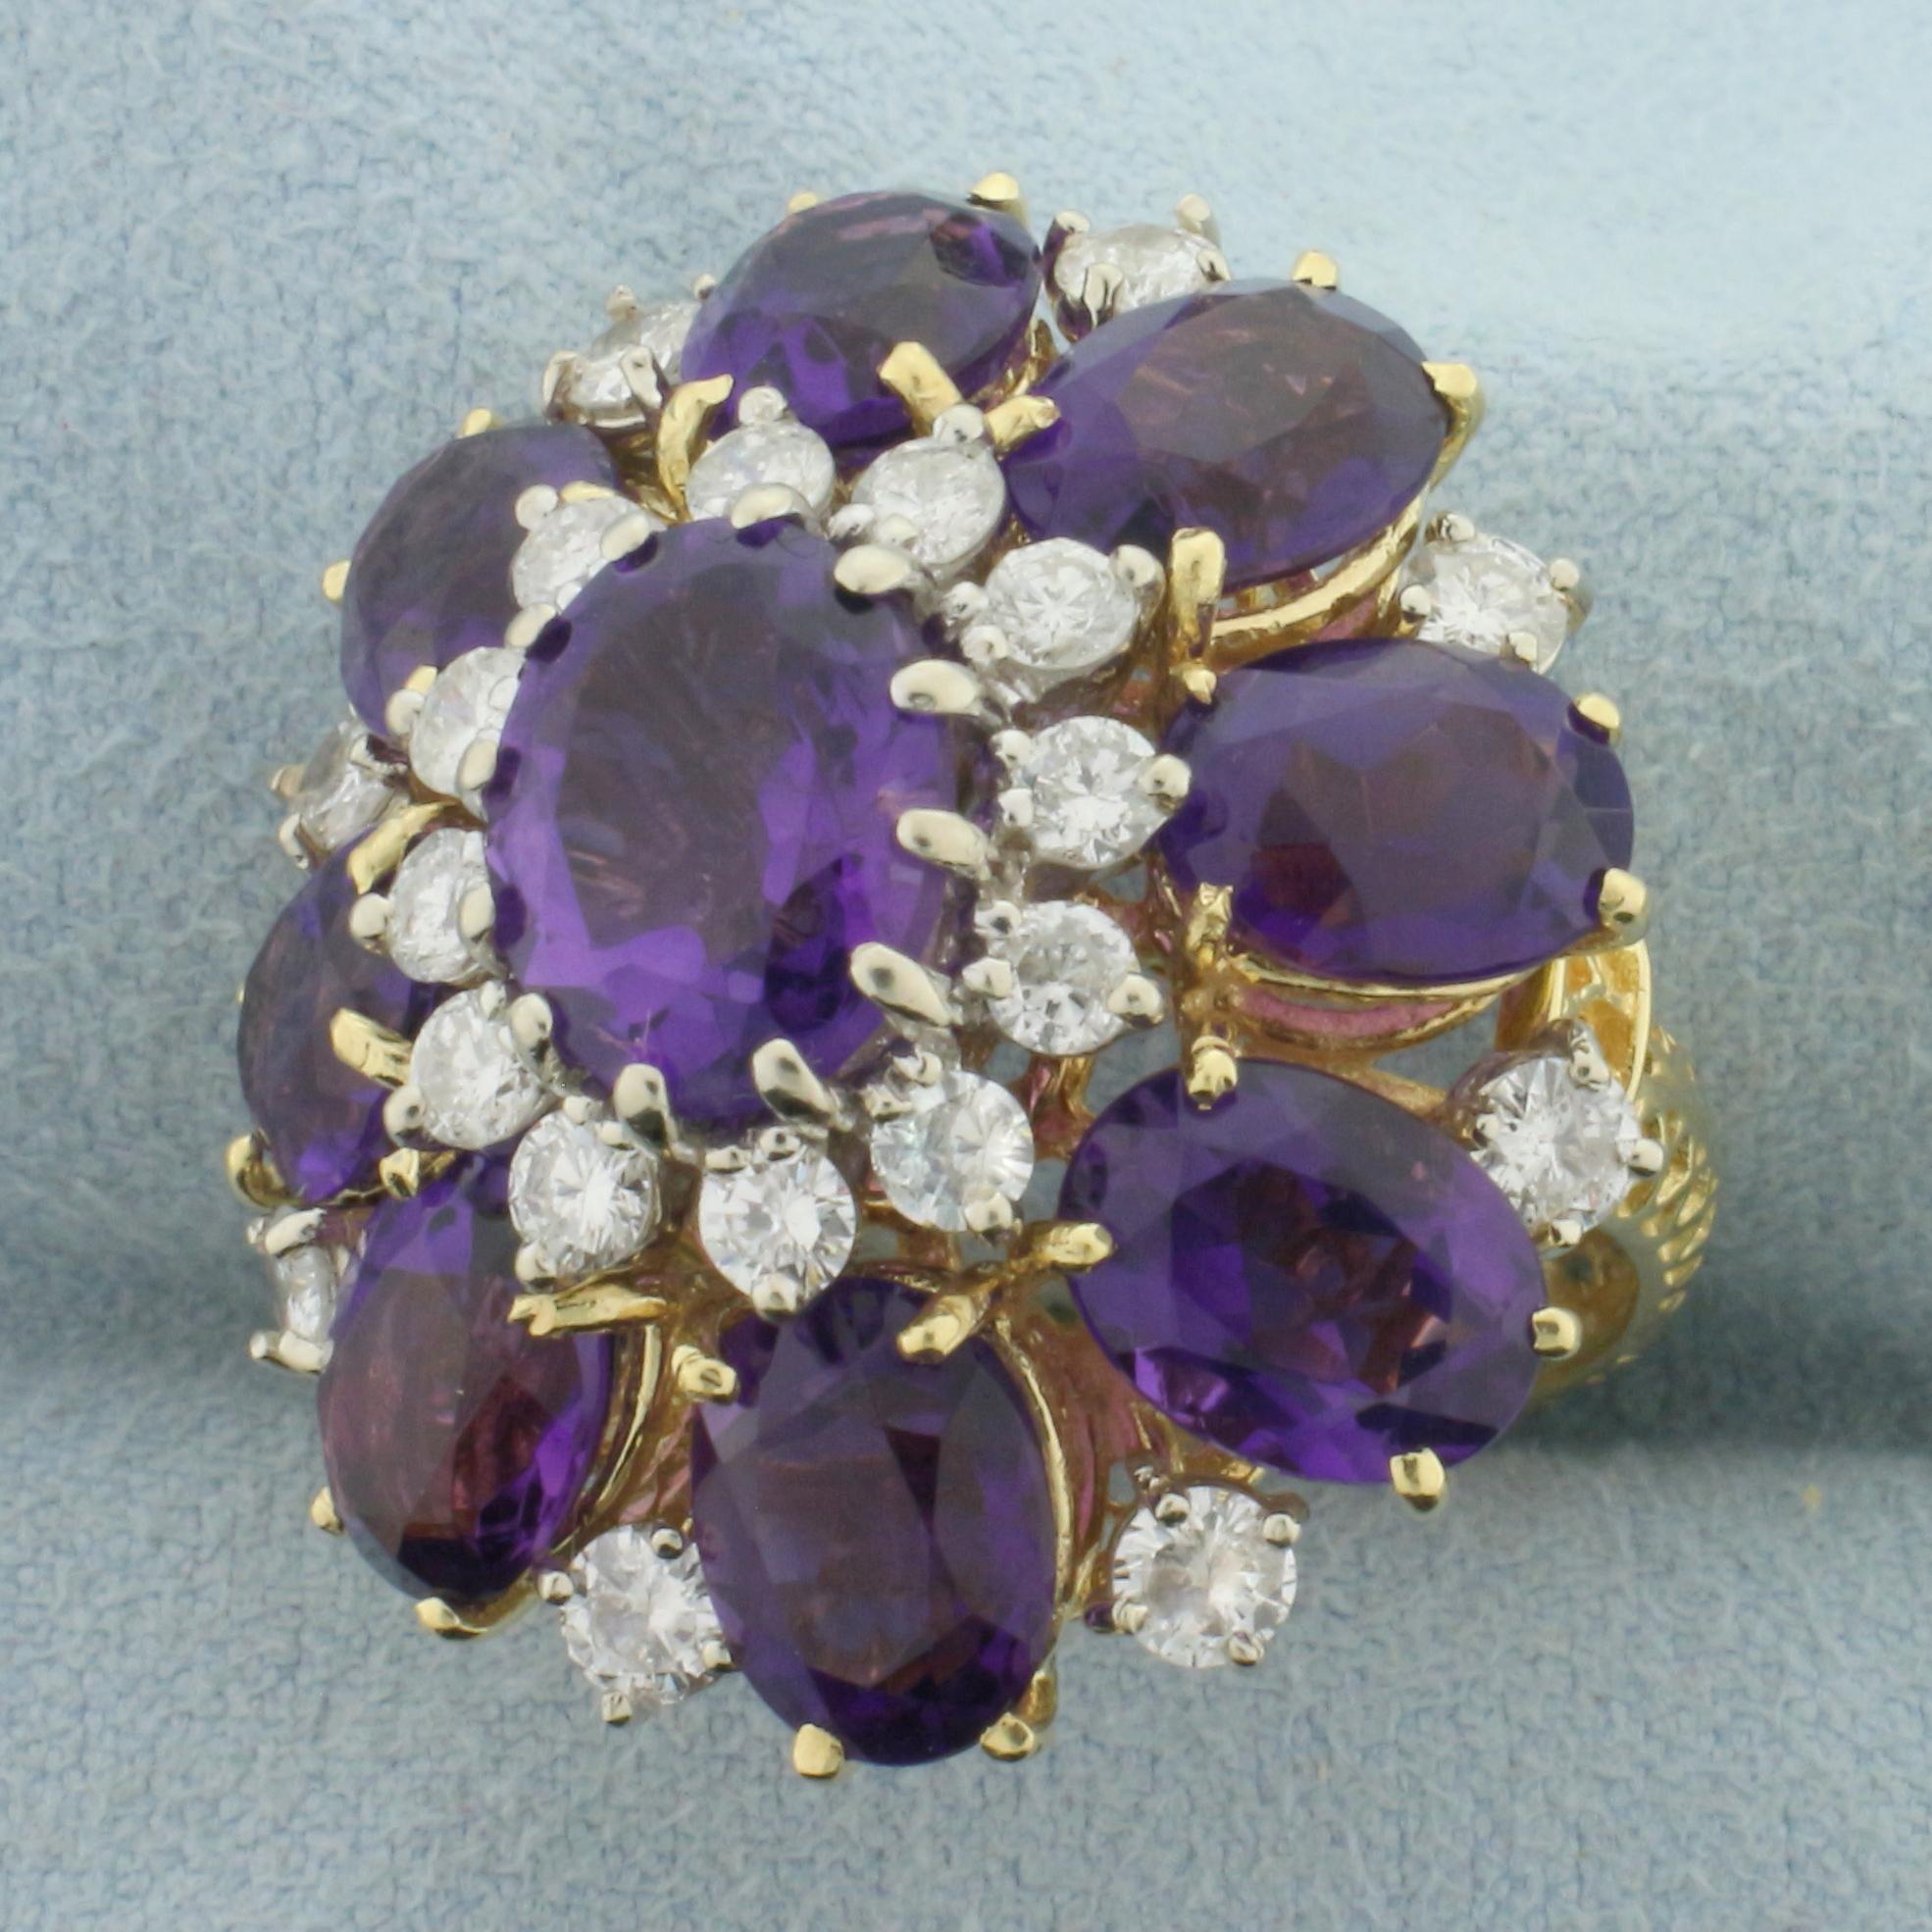 14ct Amethyst And Diamond Flower Statement Ring In 18k Yellow Gold